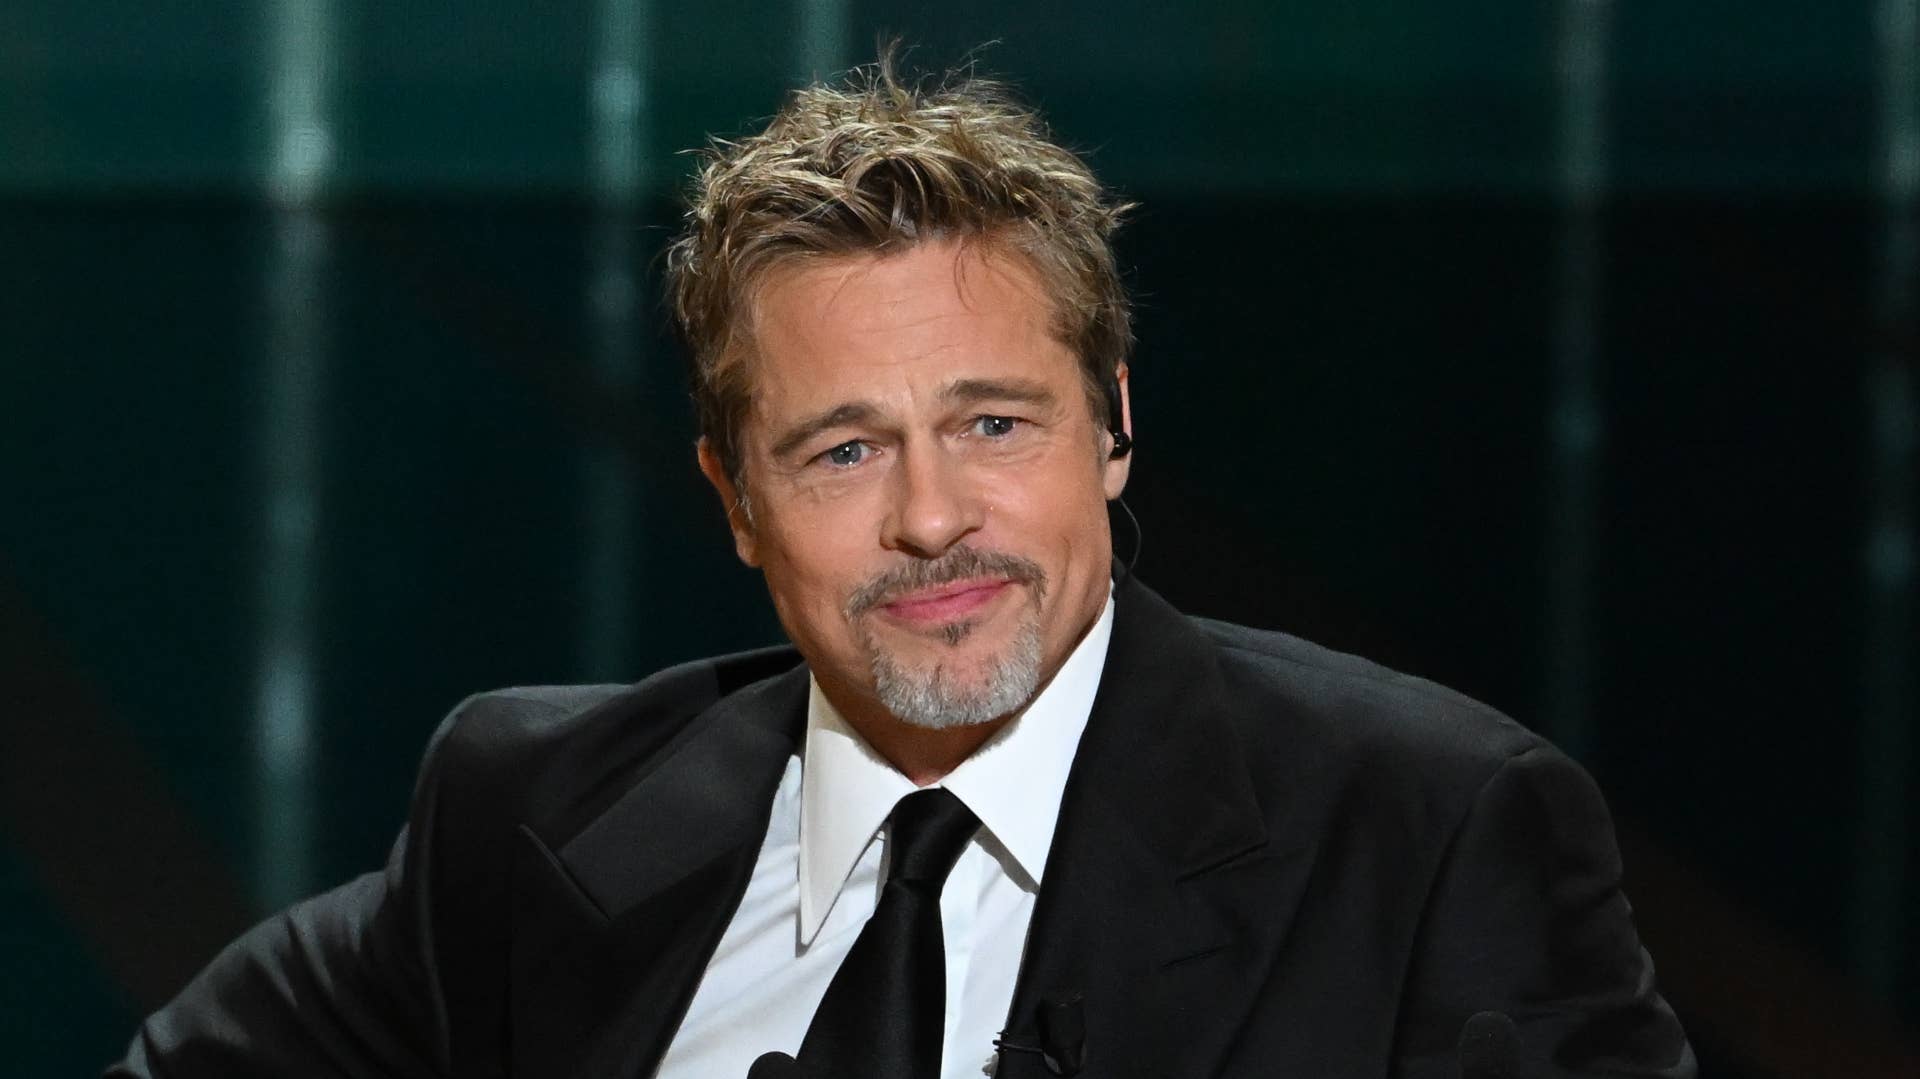 Brad Pitt appears onstage during an international awards ceremony.